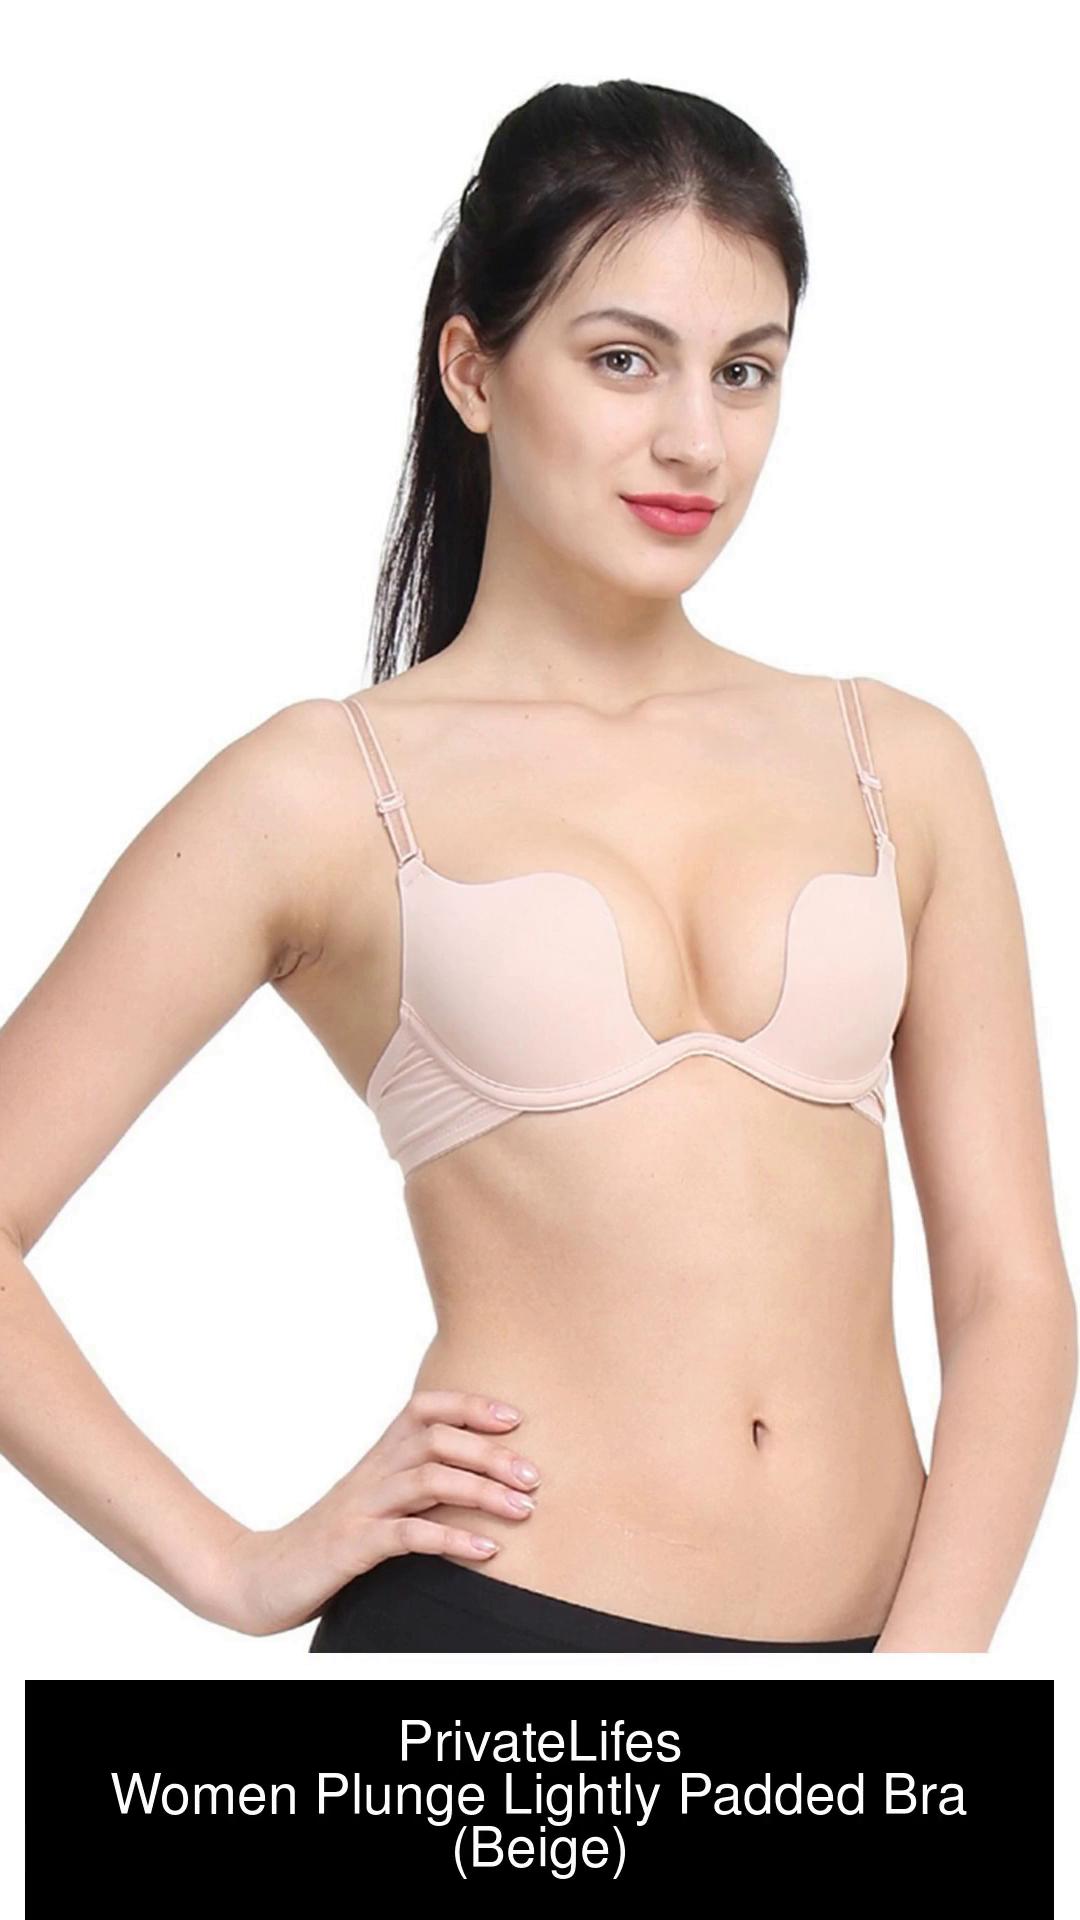 PrivateLifes Beautiful Fantastic Women Plunge Lightly Padded Bra - Buy  Beige PrivateLifes Beautiful Fantastic Women Plunge Lightly Padded Bra  Online at Best Prices in India